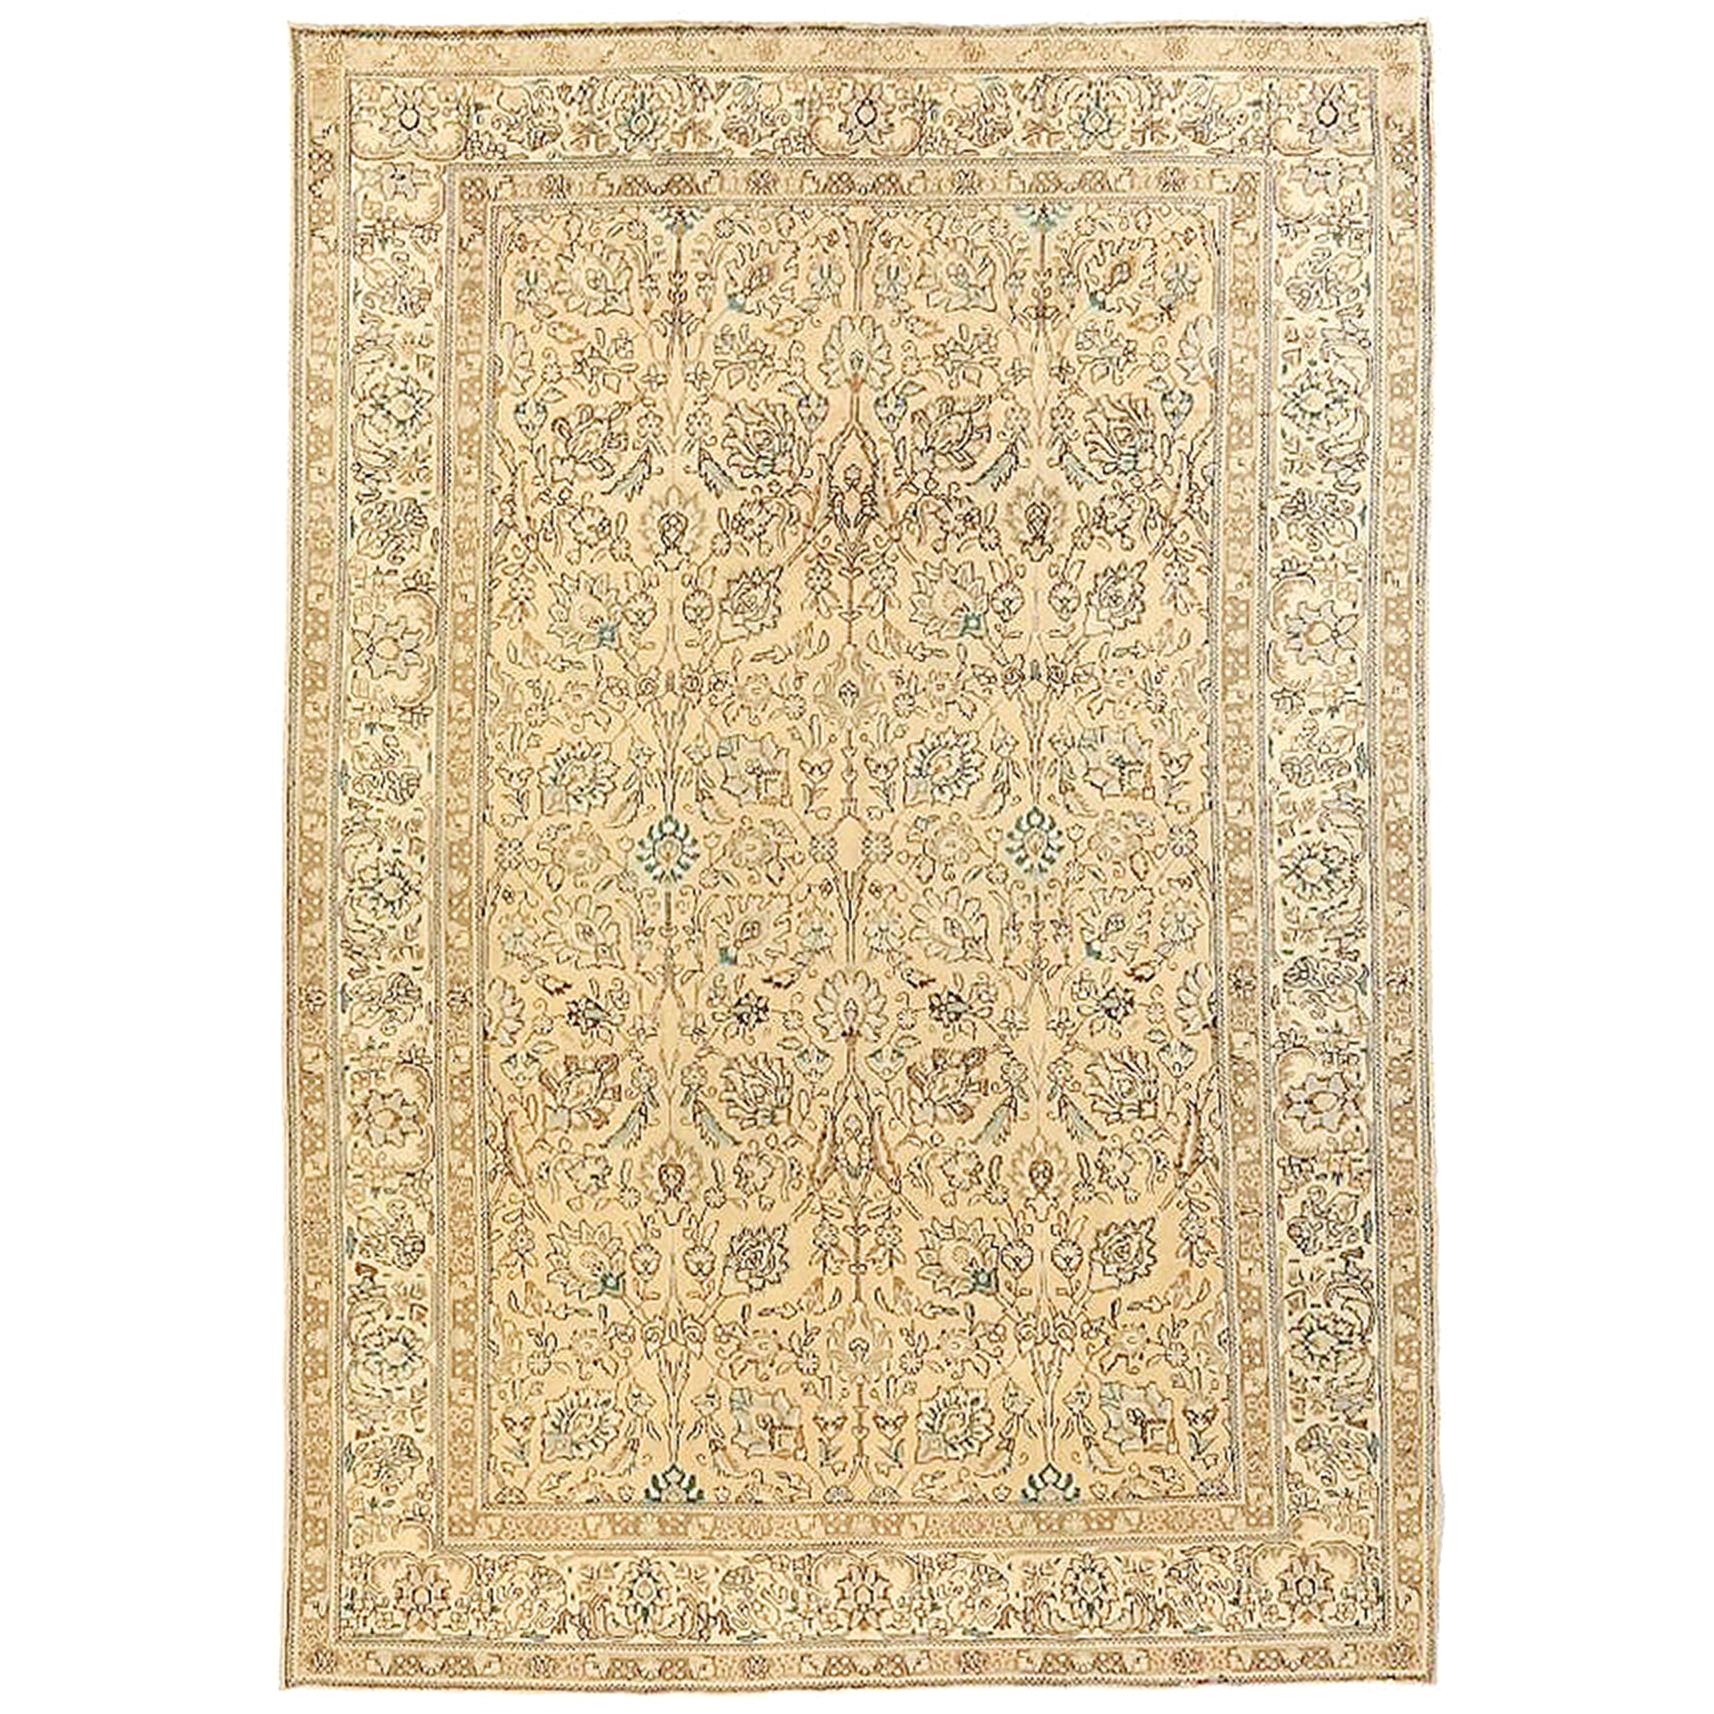 Antique Persian Tabriz Rug with Black and Green Floral Details on Beige Field